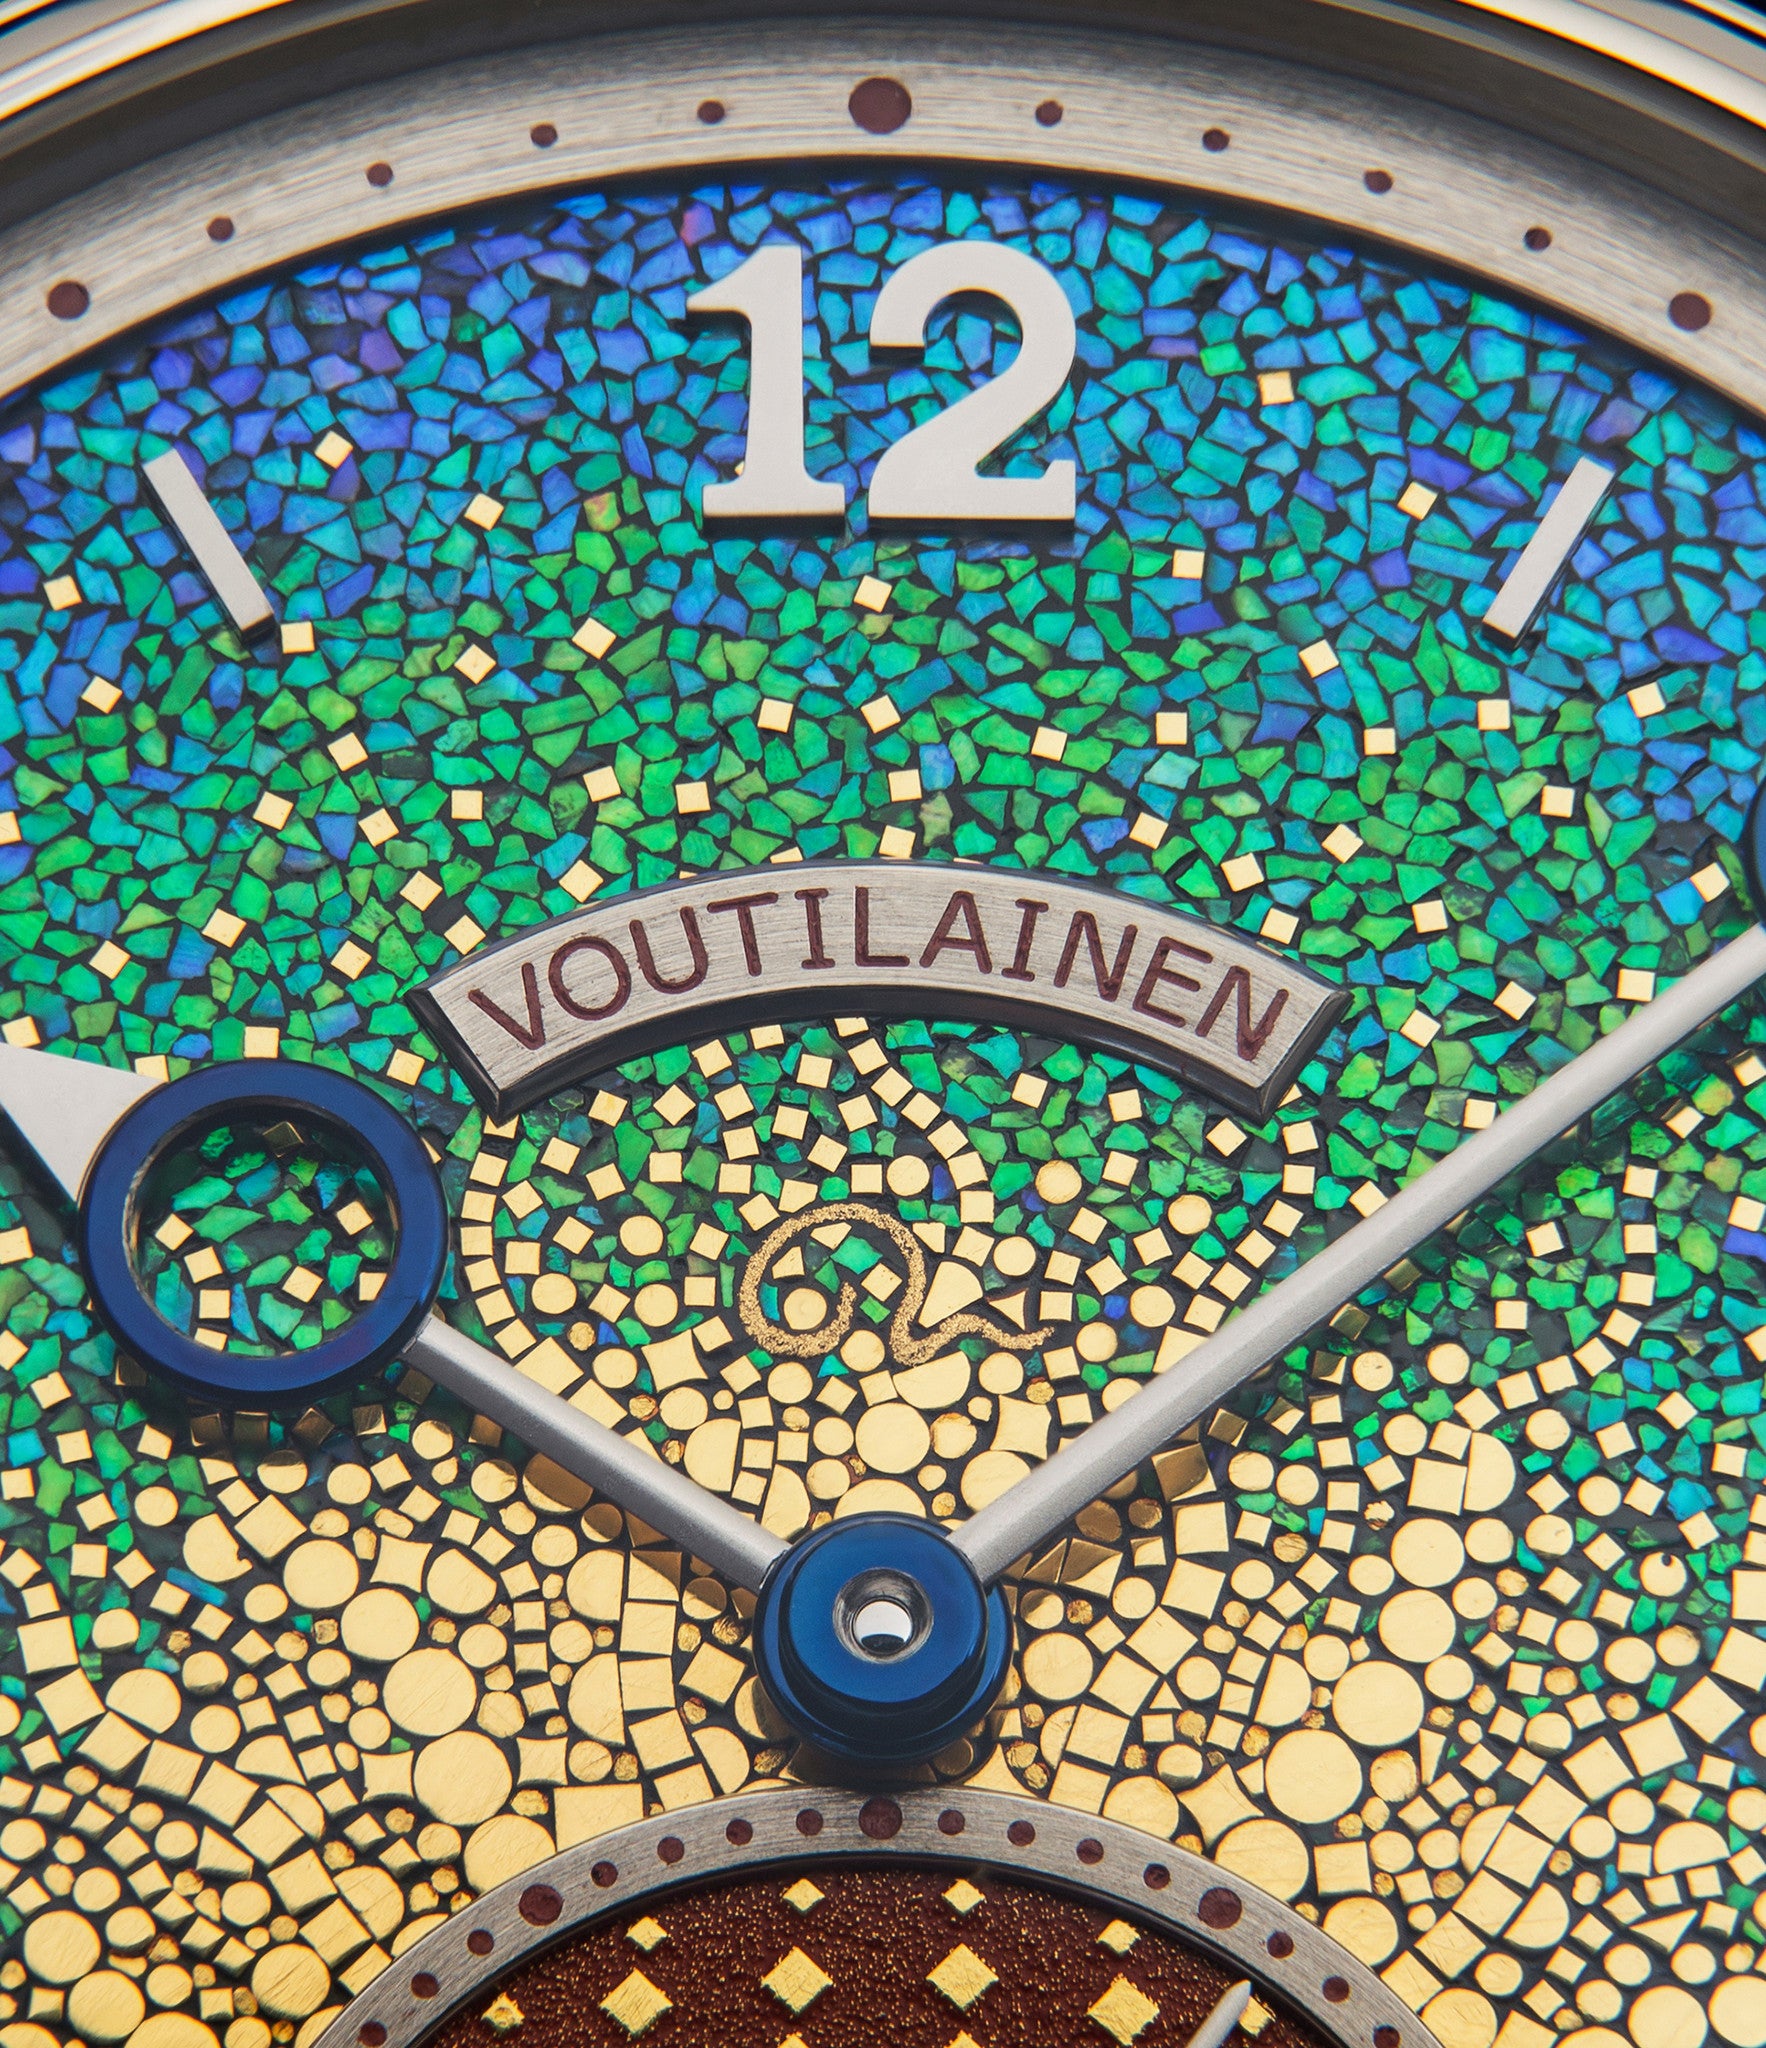 selling Kari Voutilainen's Vingt-8 Kaen Baselworld SIHH unique piece watch Unryuan dial mosaic green blue gold Japanese hand-made dial Swiss watch for sale in white gold from approved re-seller of independent watchmakers WATCH XCHANGE London